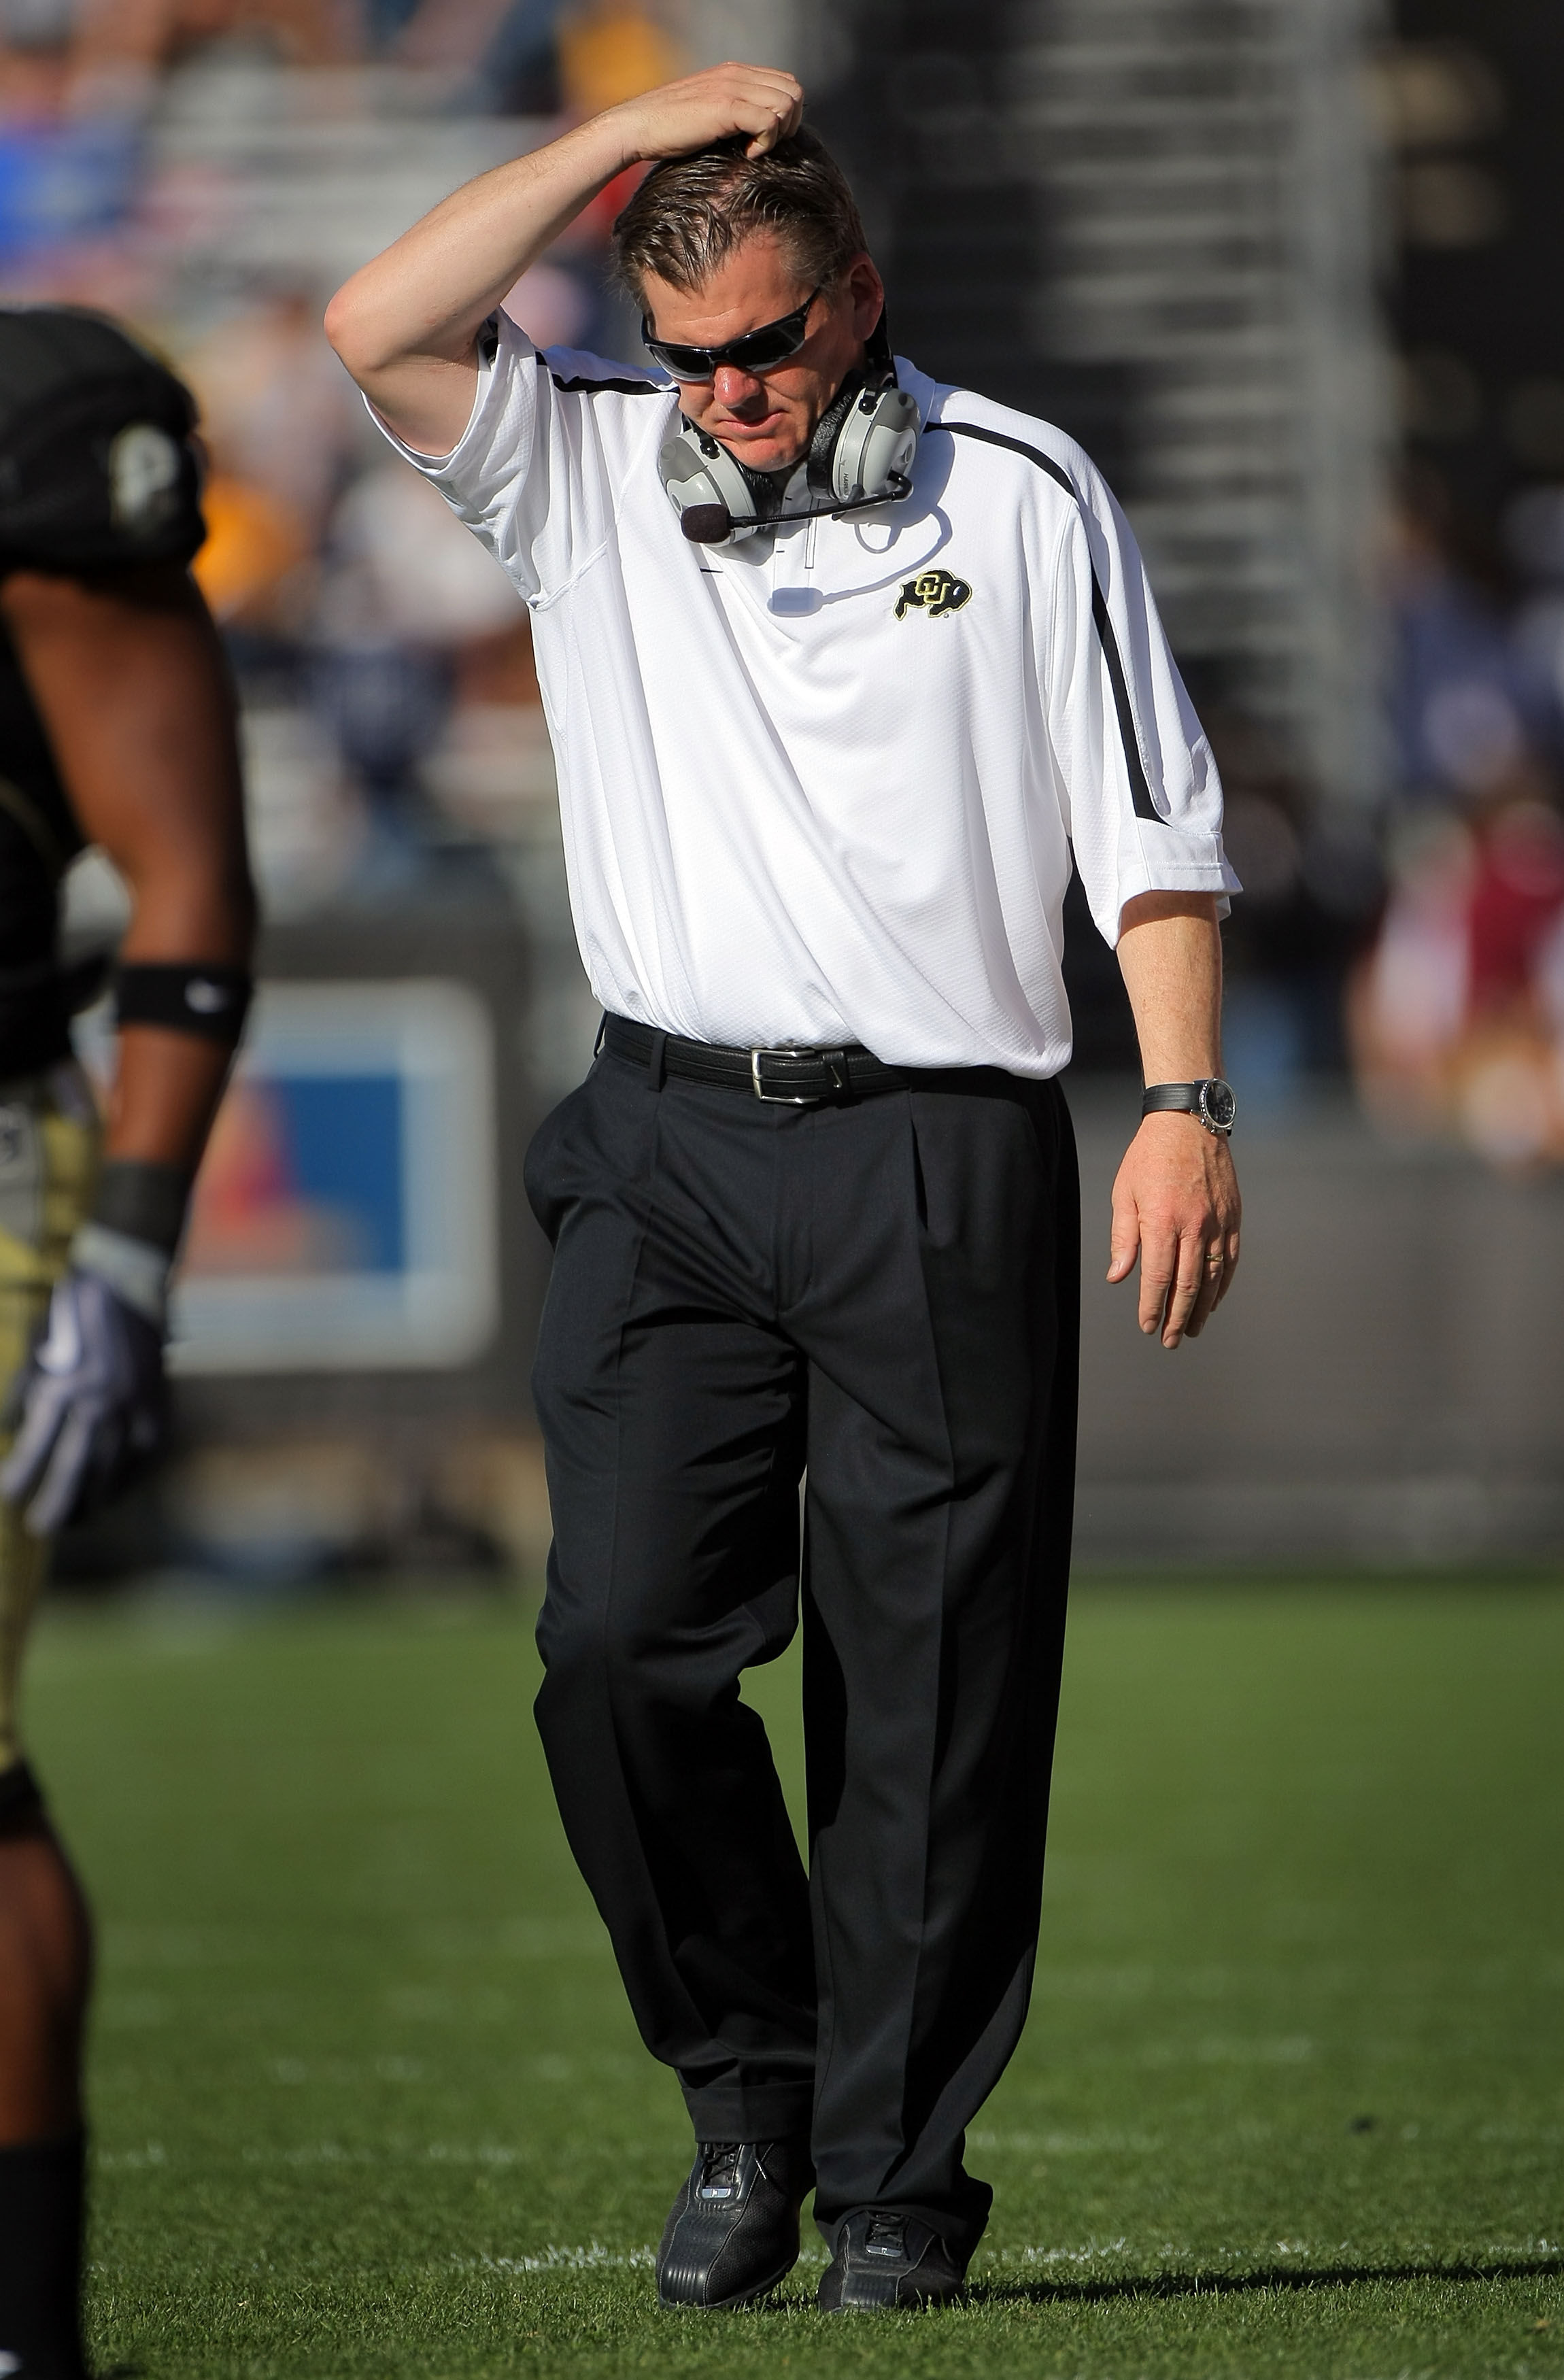 BOULDER, CO - NOVEMBER 07:  Head coach Dan Hawkins leads the Colorado Buffaloes against the Texas A&M Aggies during NCAA college football action at Folsom Field on November 7, 2009 in Boulder, Colorado. Colorado defeated Texas A&M 35-34.  (Photo by Doug P